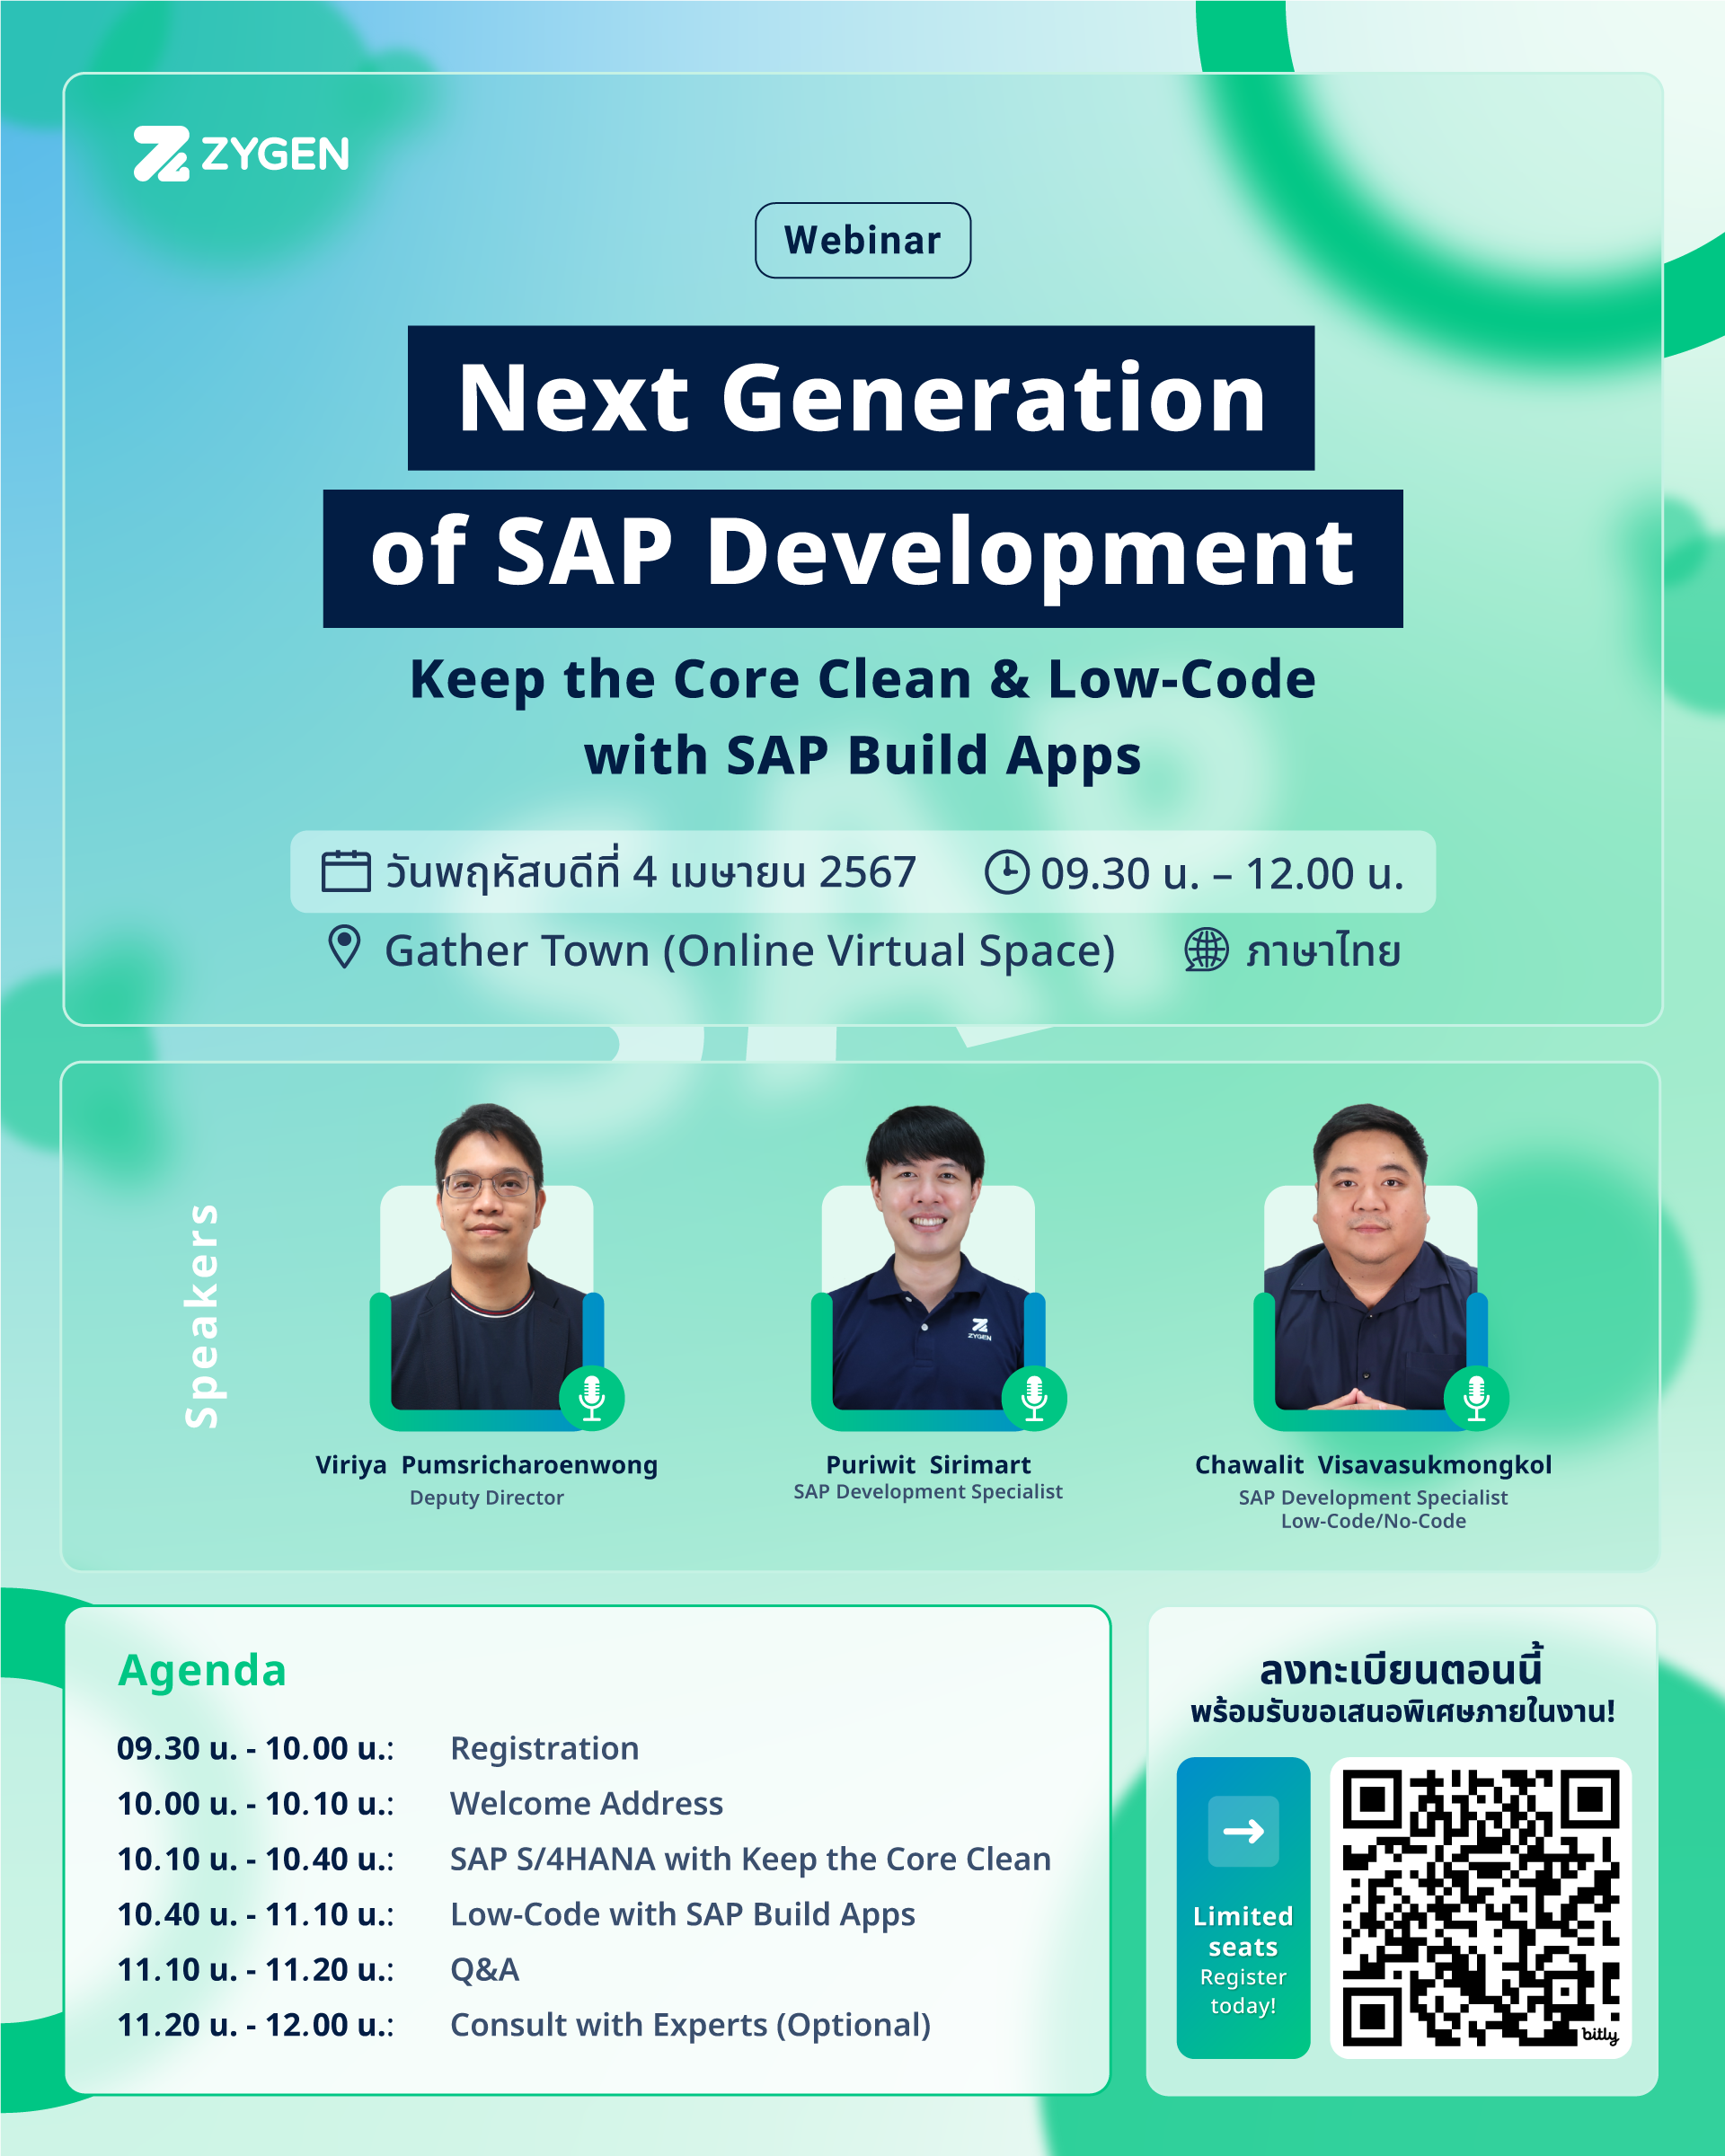 Next Generation of SAP Development: Keep the Core Clean & Low-Code with SAP Build Apps